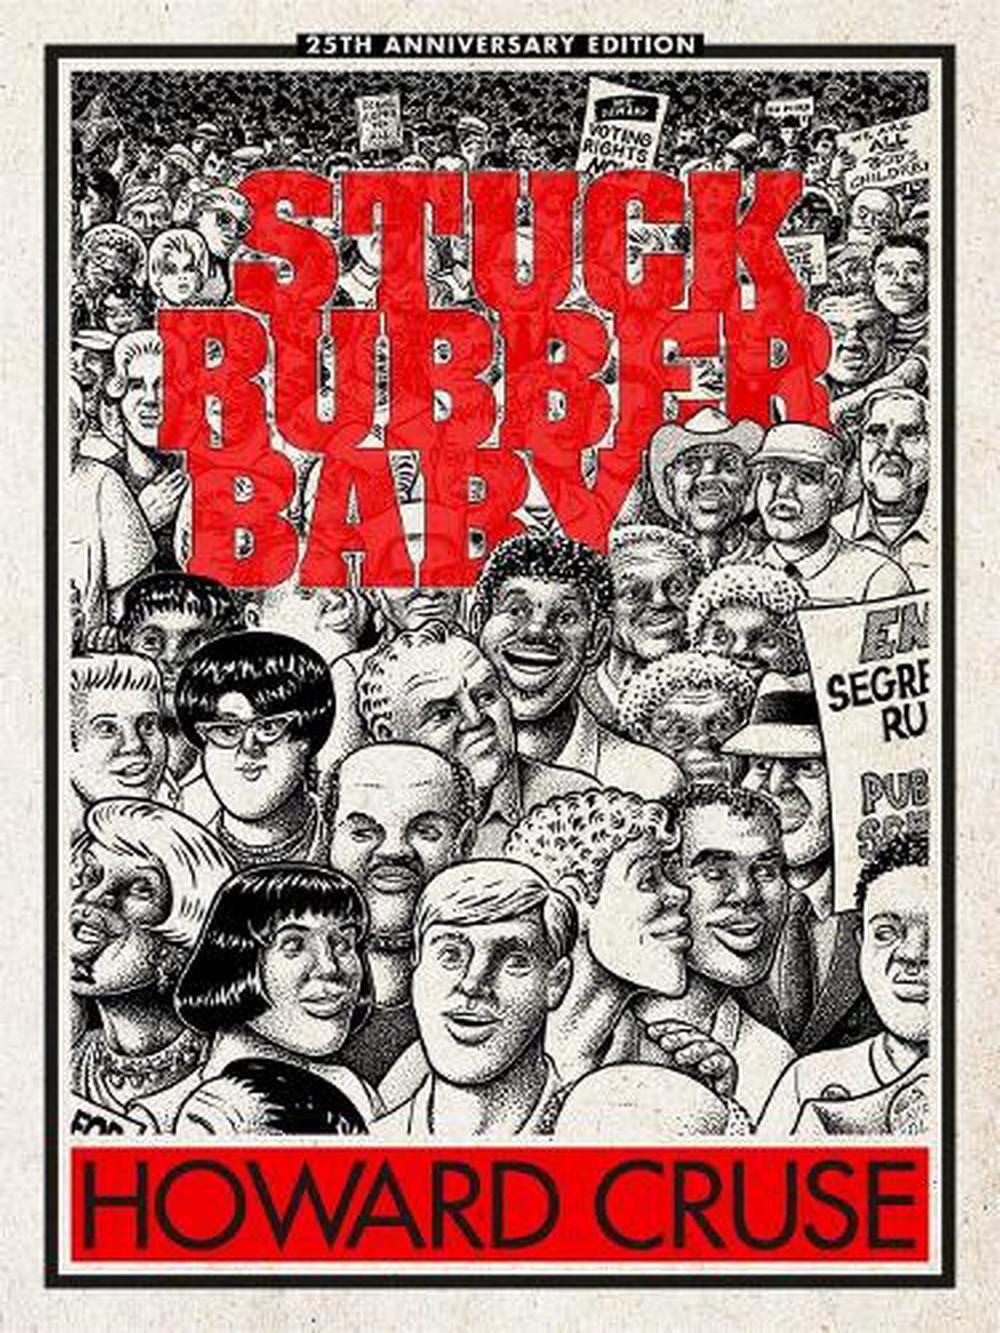 Stuck Rubber Baby 25th Anniversary Edition by Howard Cruse (English) Hardcover B